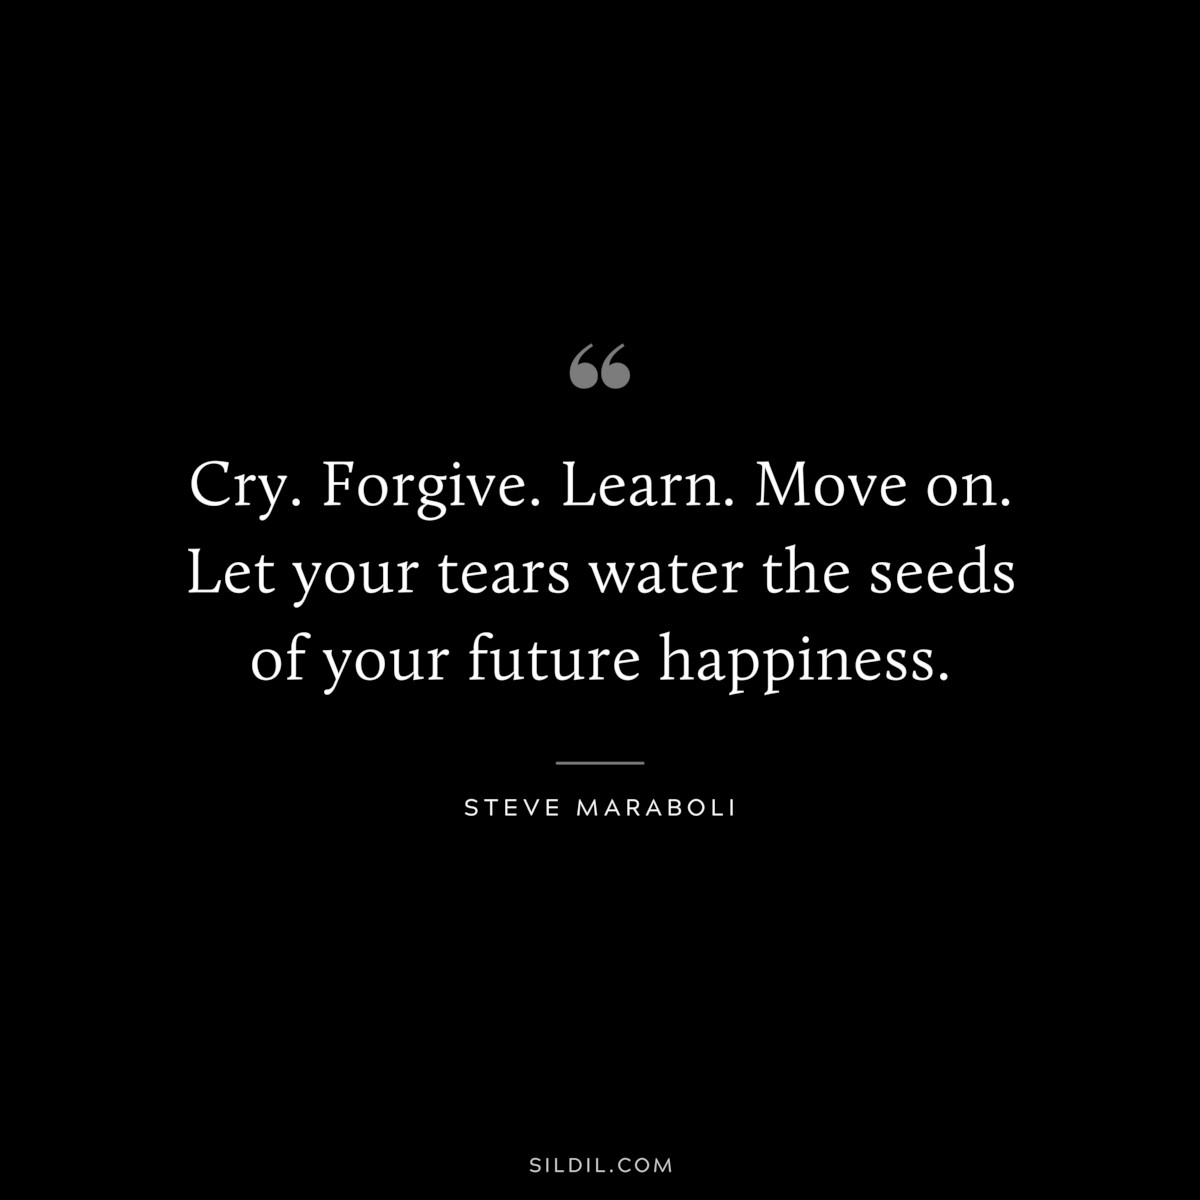 Cry. Forgive. Learn. Move on. Let your tears water the seeds of your future happiness. ― Steve Maraboli